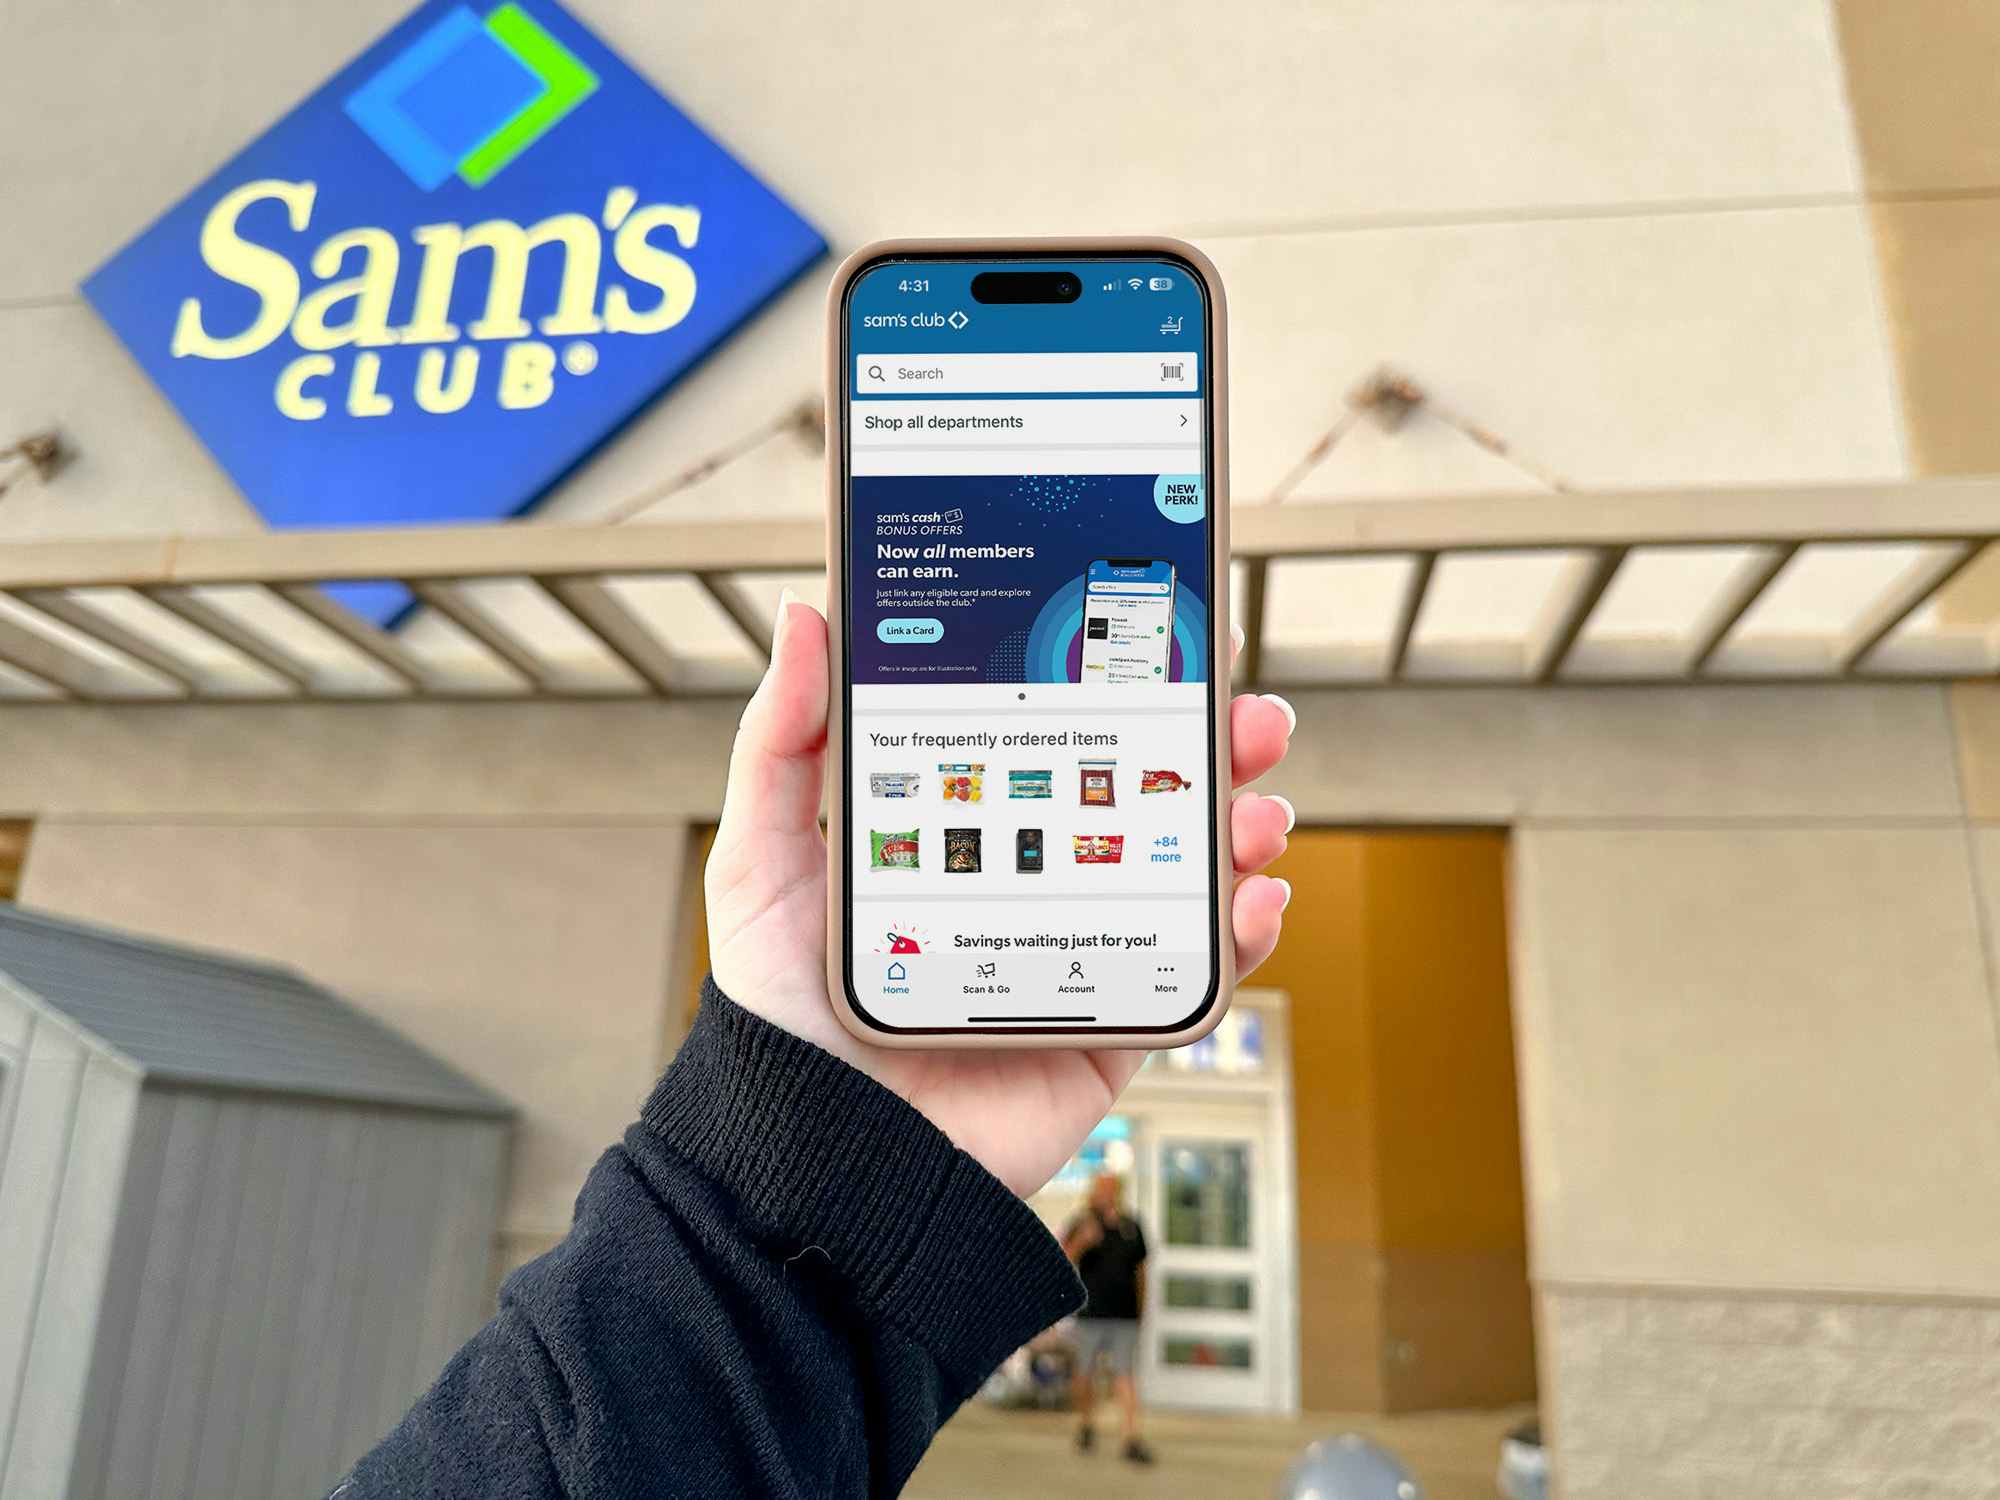 Someone holding up a phone displaying the Sam's Club app in front of Sam's Club